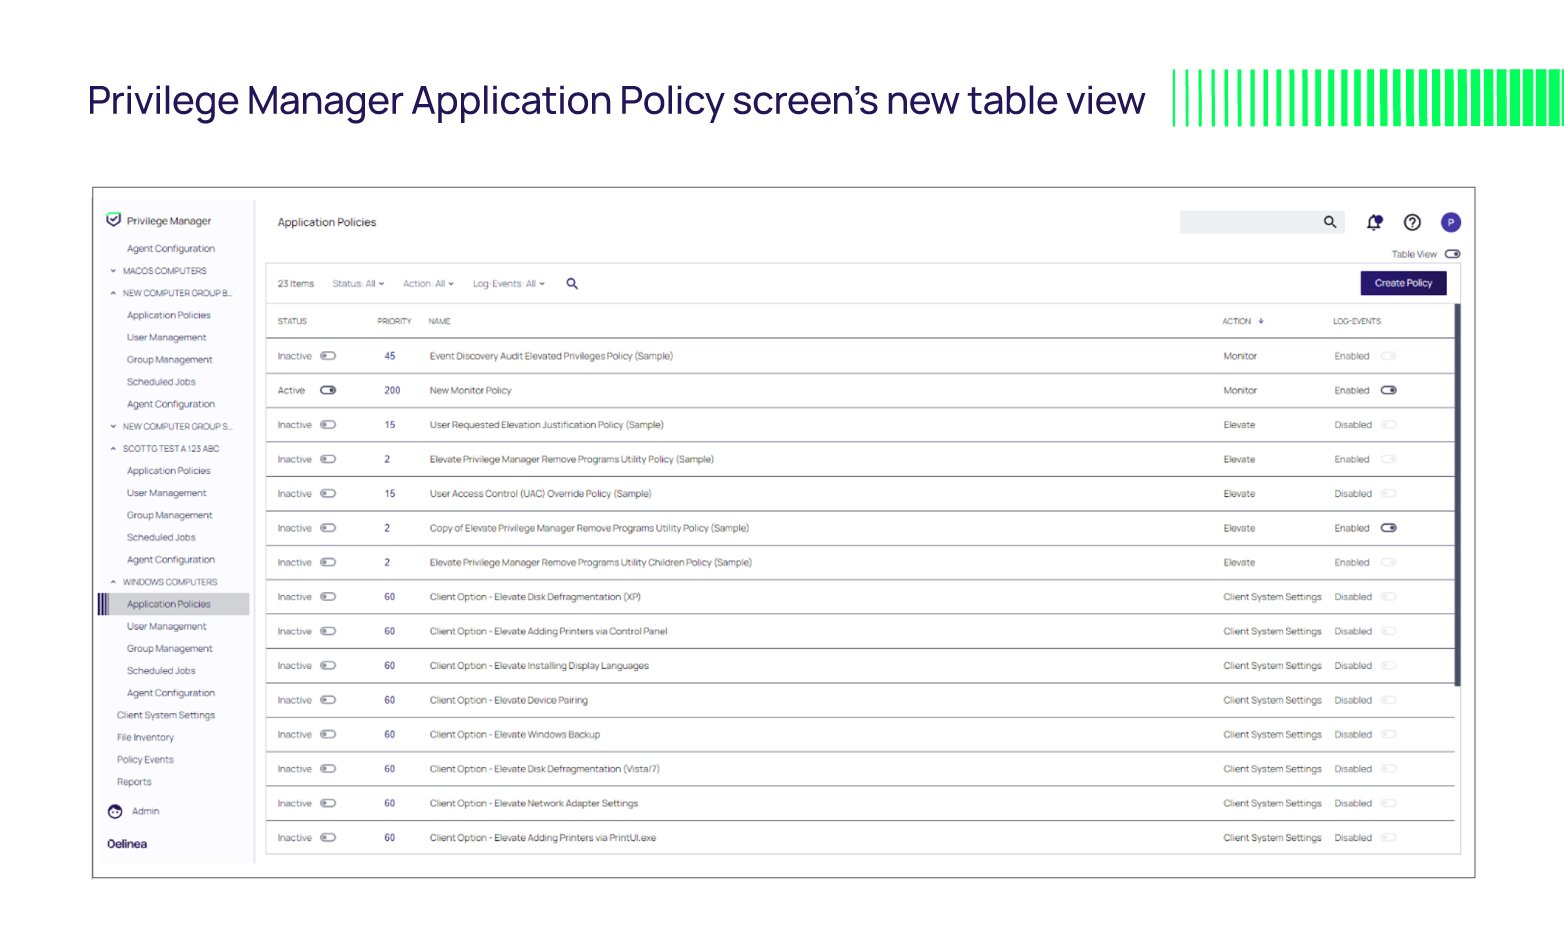 Privilege Manager Application Policy - New Table View